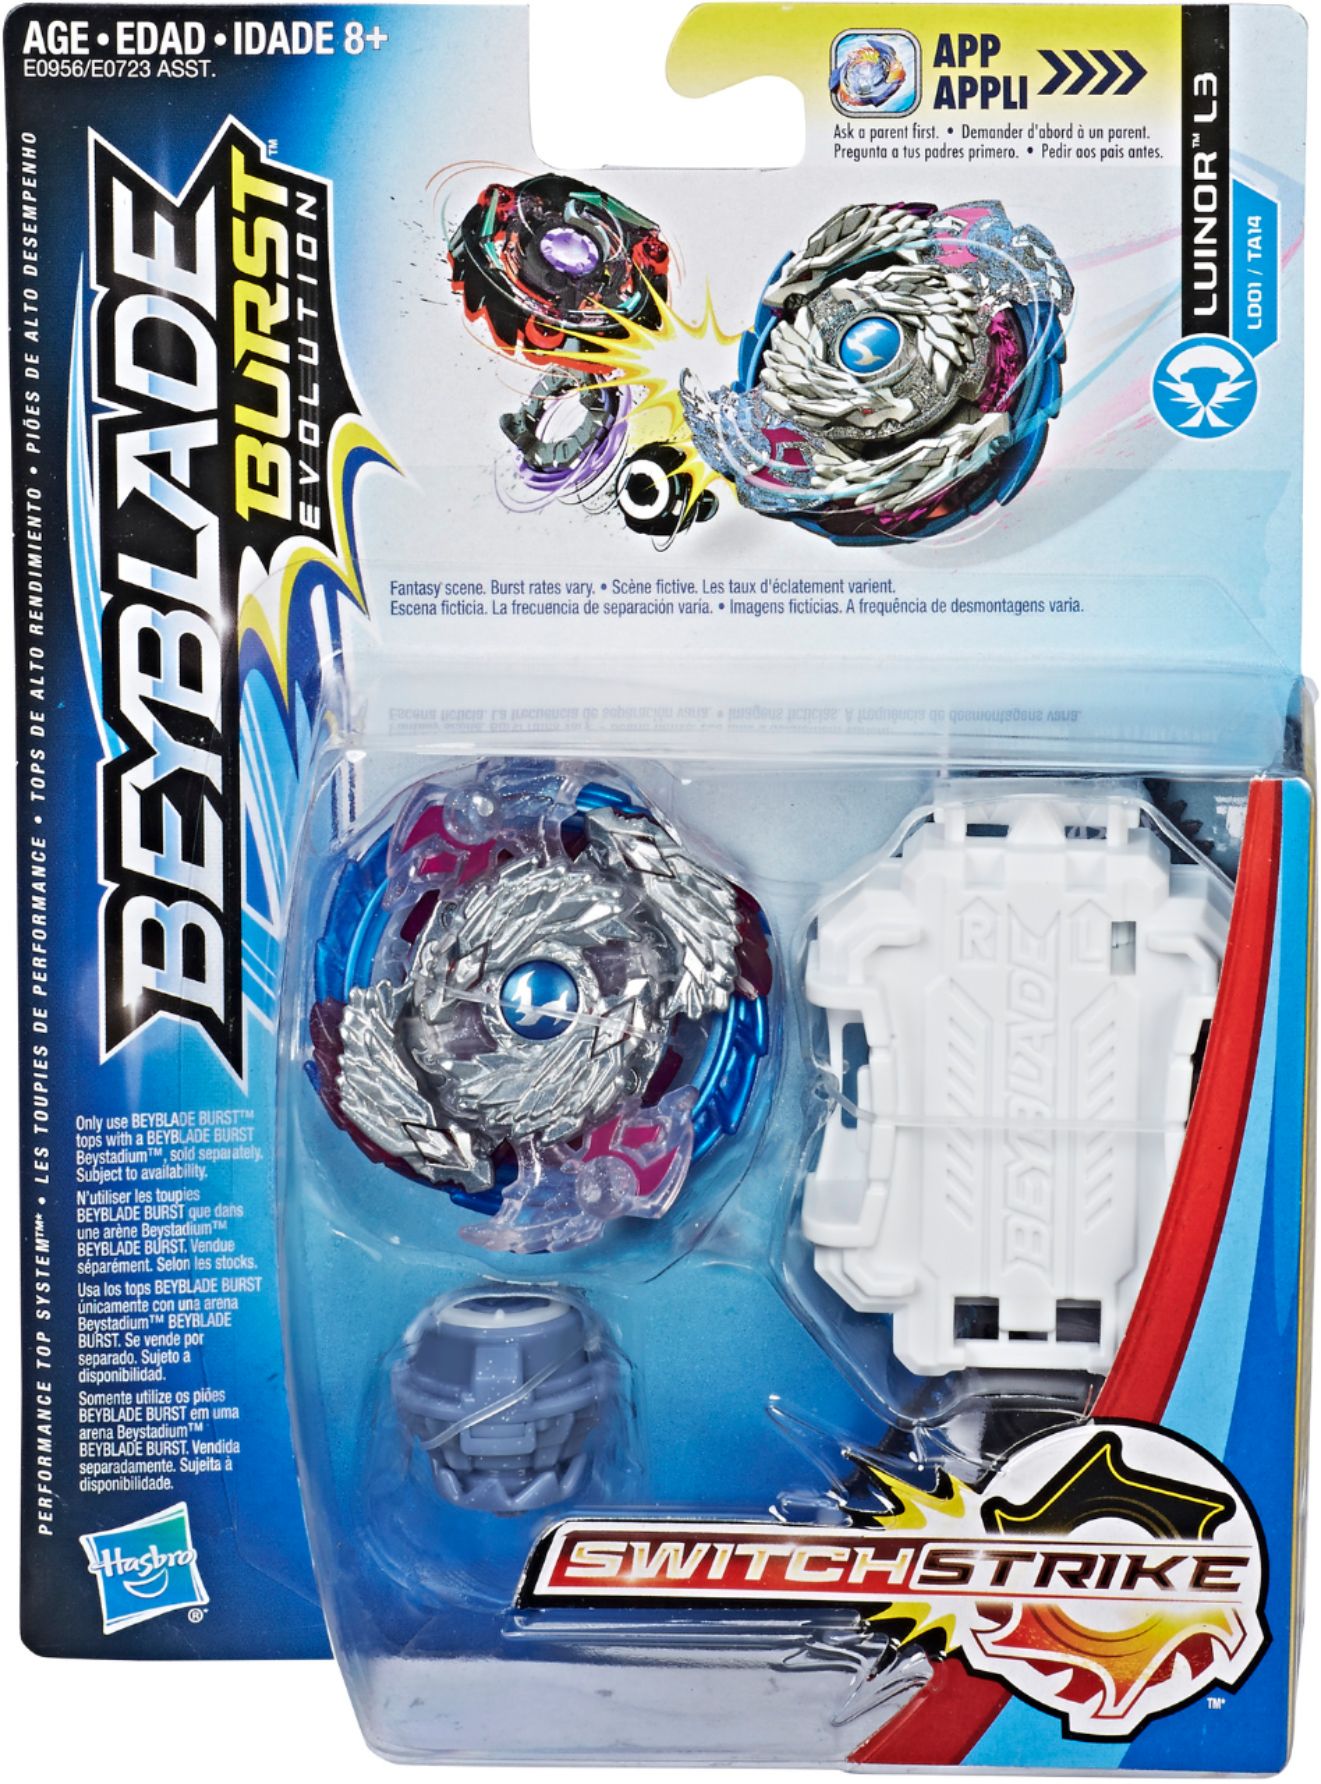 Burst Evolution SwitchStrike Starter Pack for Beyblade Game Colors May Vary Colors May Vary E0723 - Best Buy